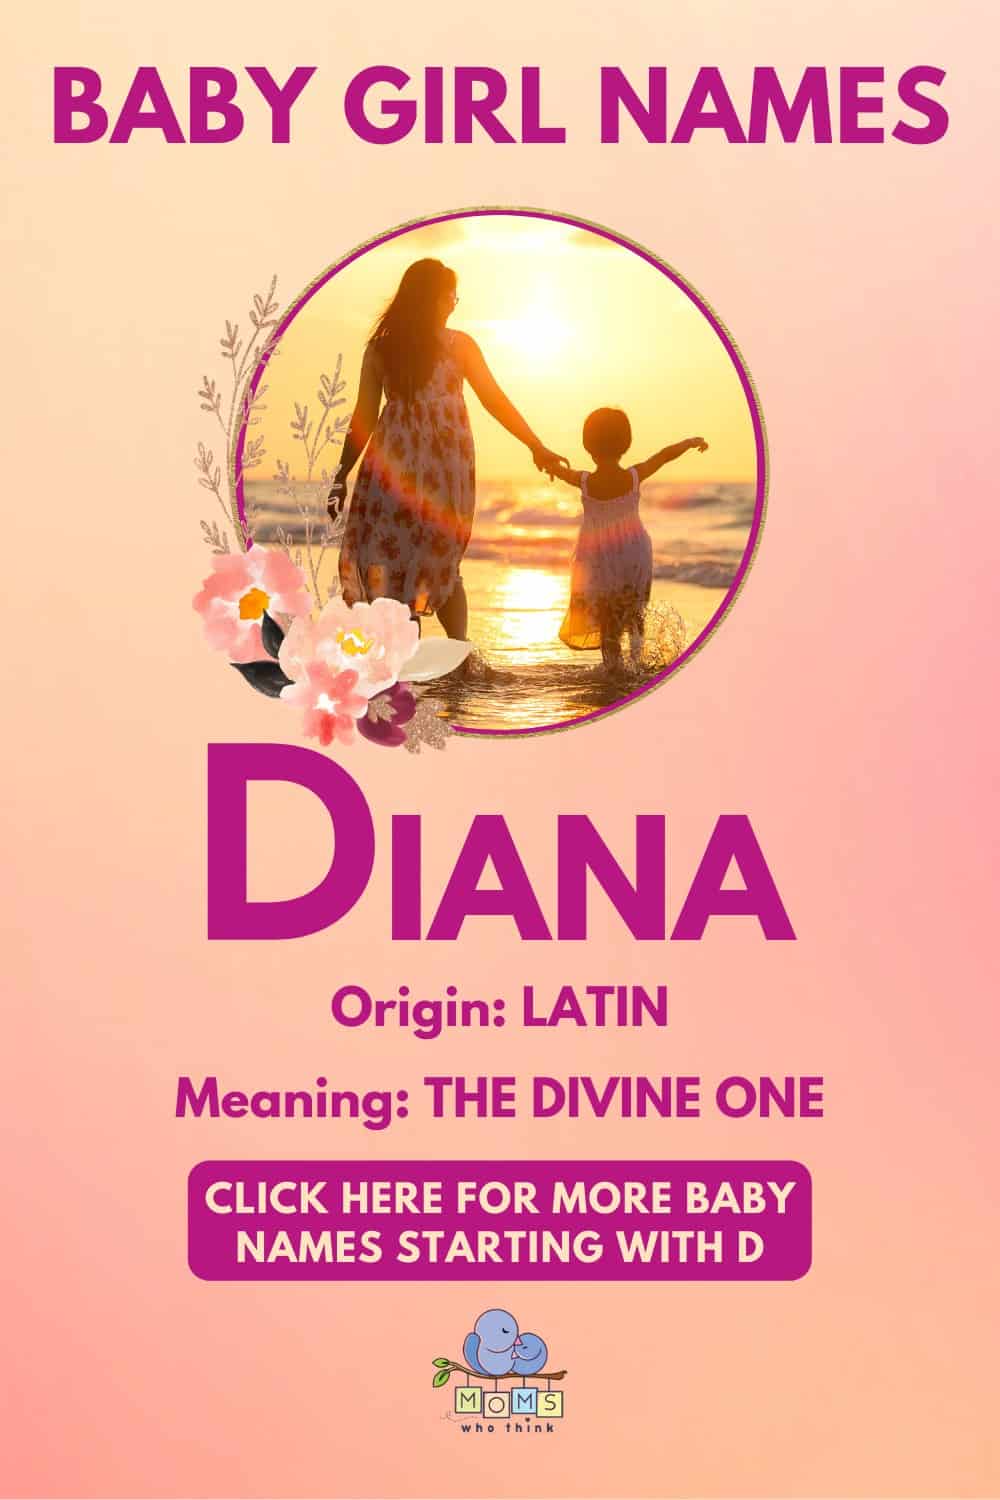 Baby girl name meanings - Diana